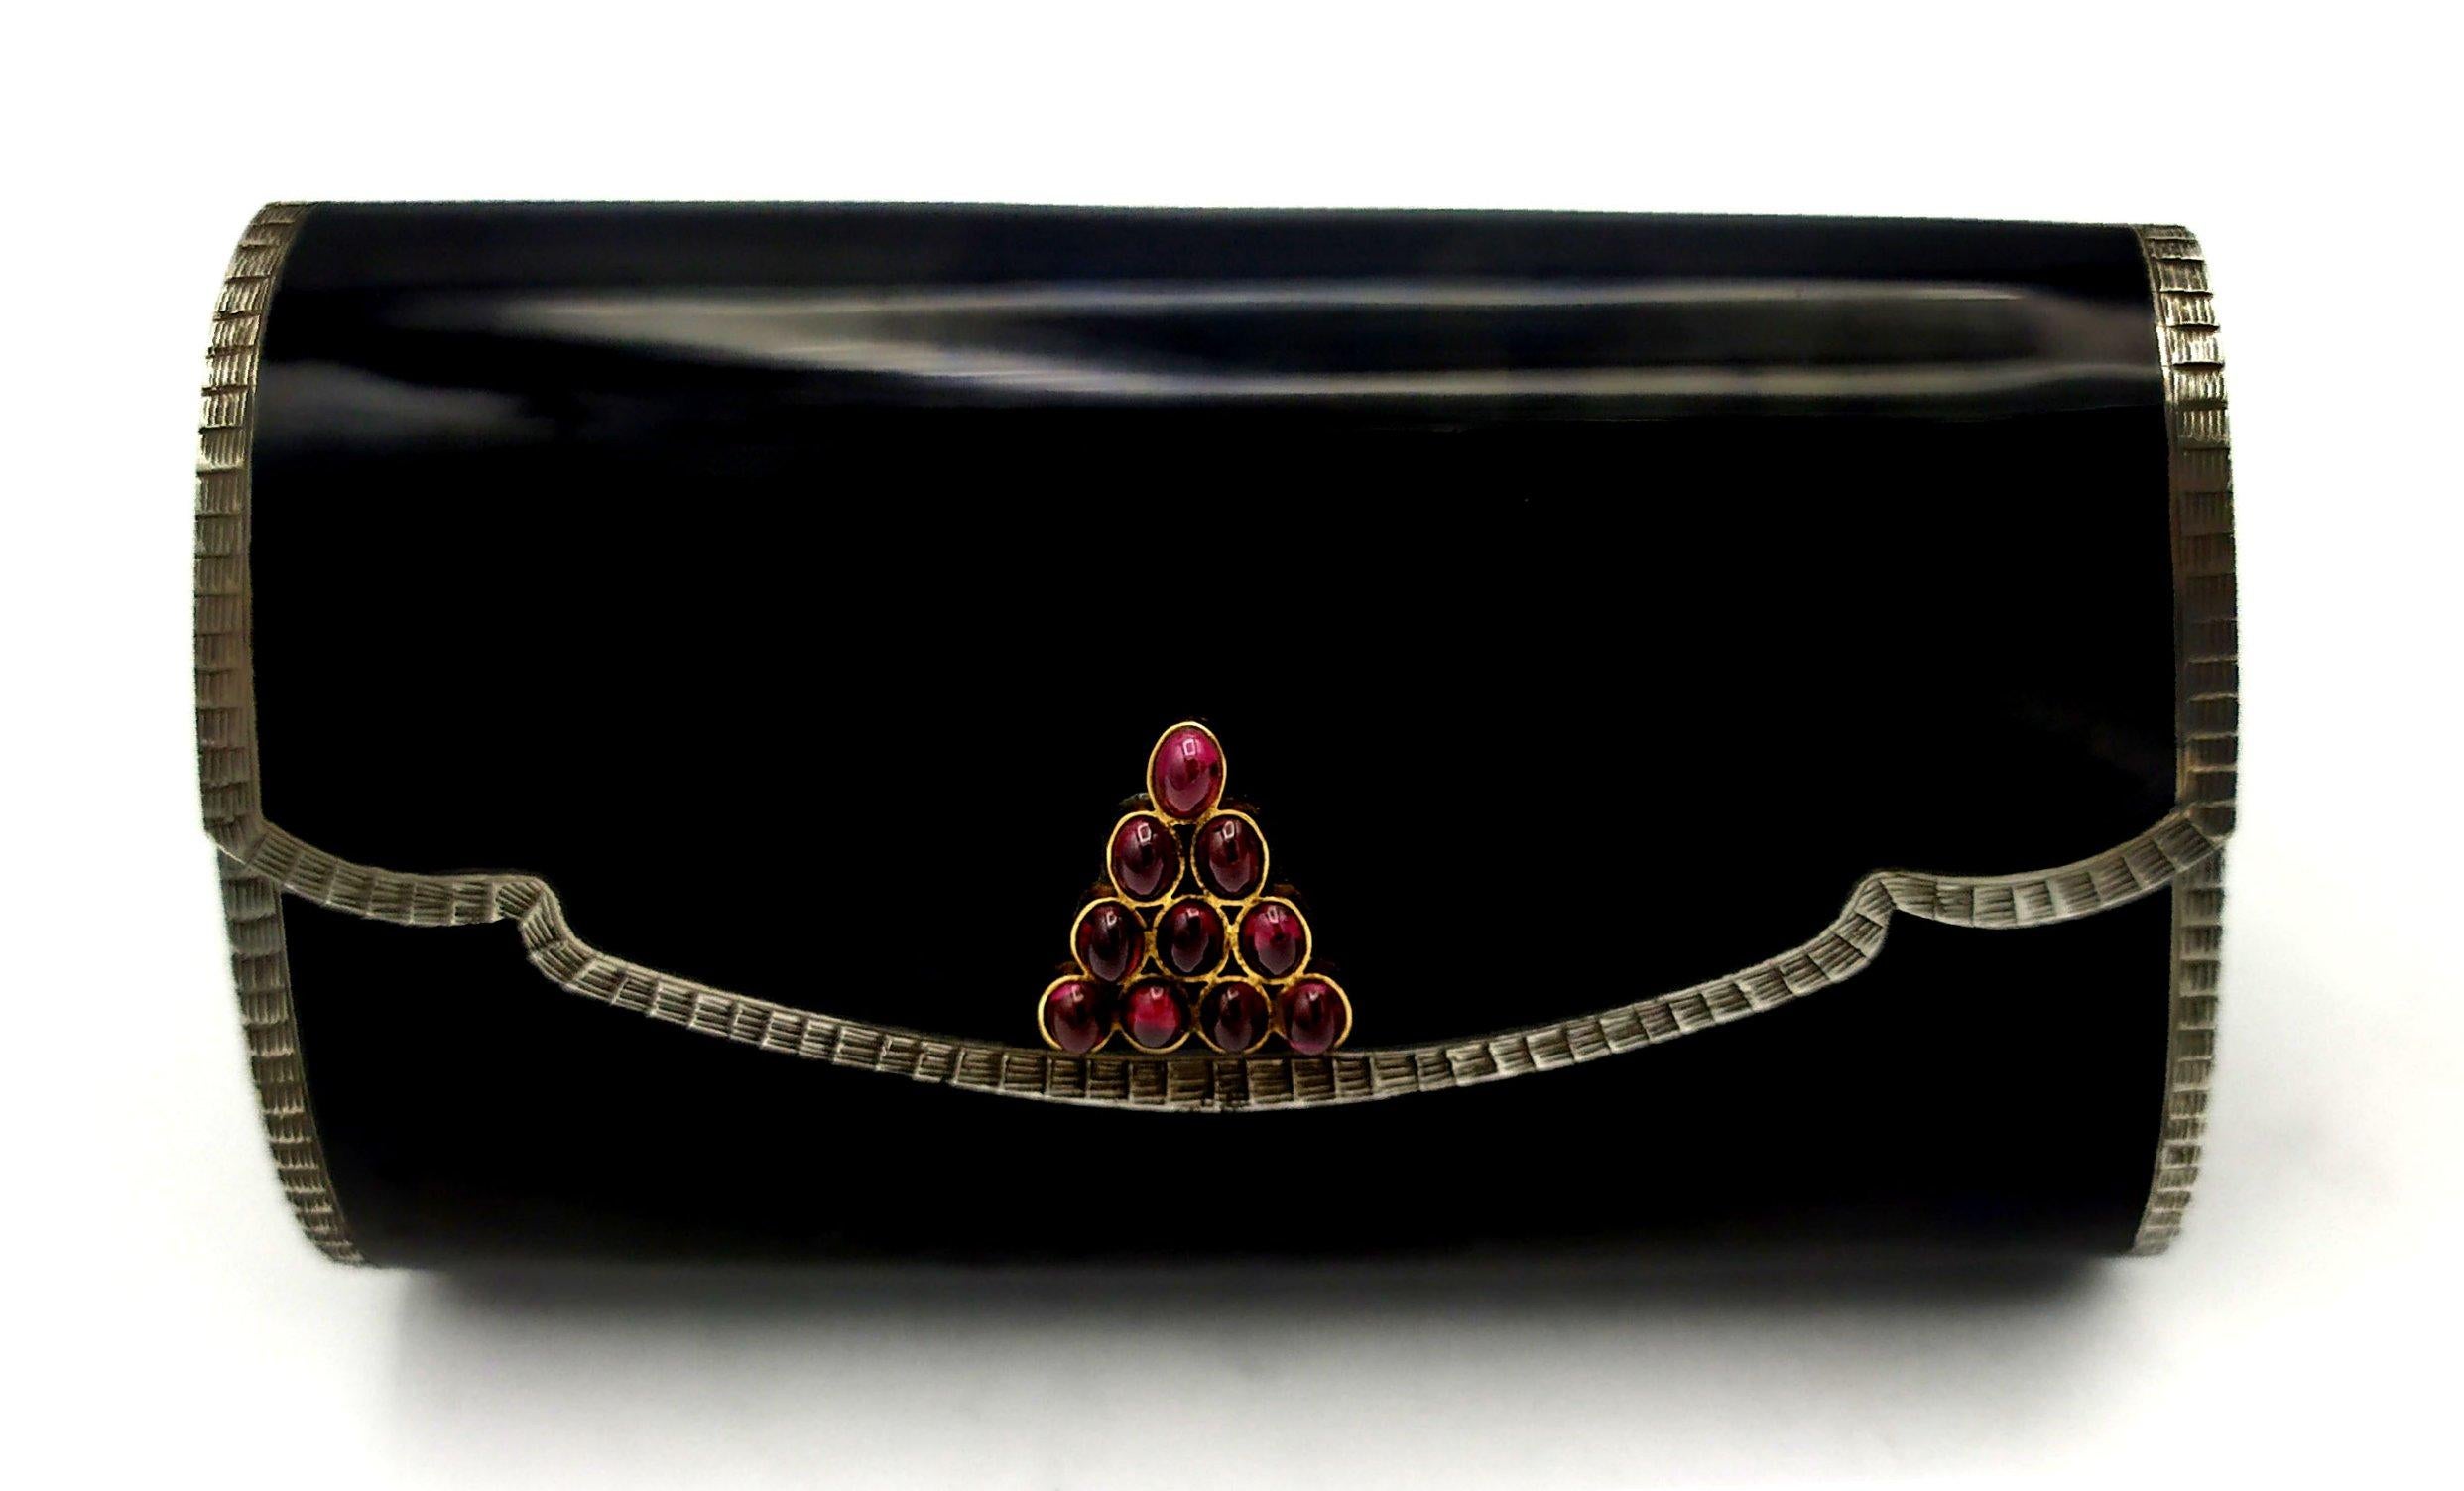 Evening bag in the shape of an envelope in 925/1000 sterling silver with black fired enamel. Measure cm. 8.2 x 4.7 x 13.5 - interior with beveled mirror and velvet lining. With triangular bezel in 750/1000 gold (18 ct.) with setting of 10 rhodolite